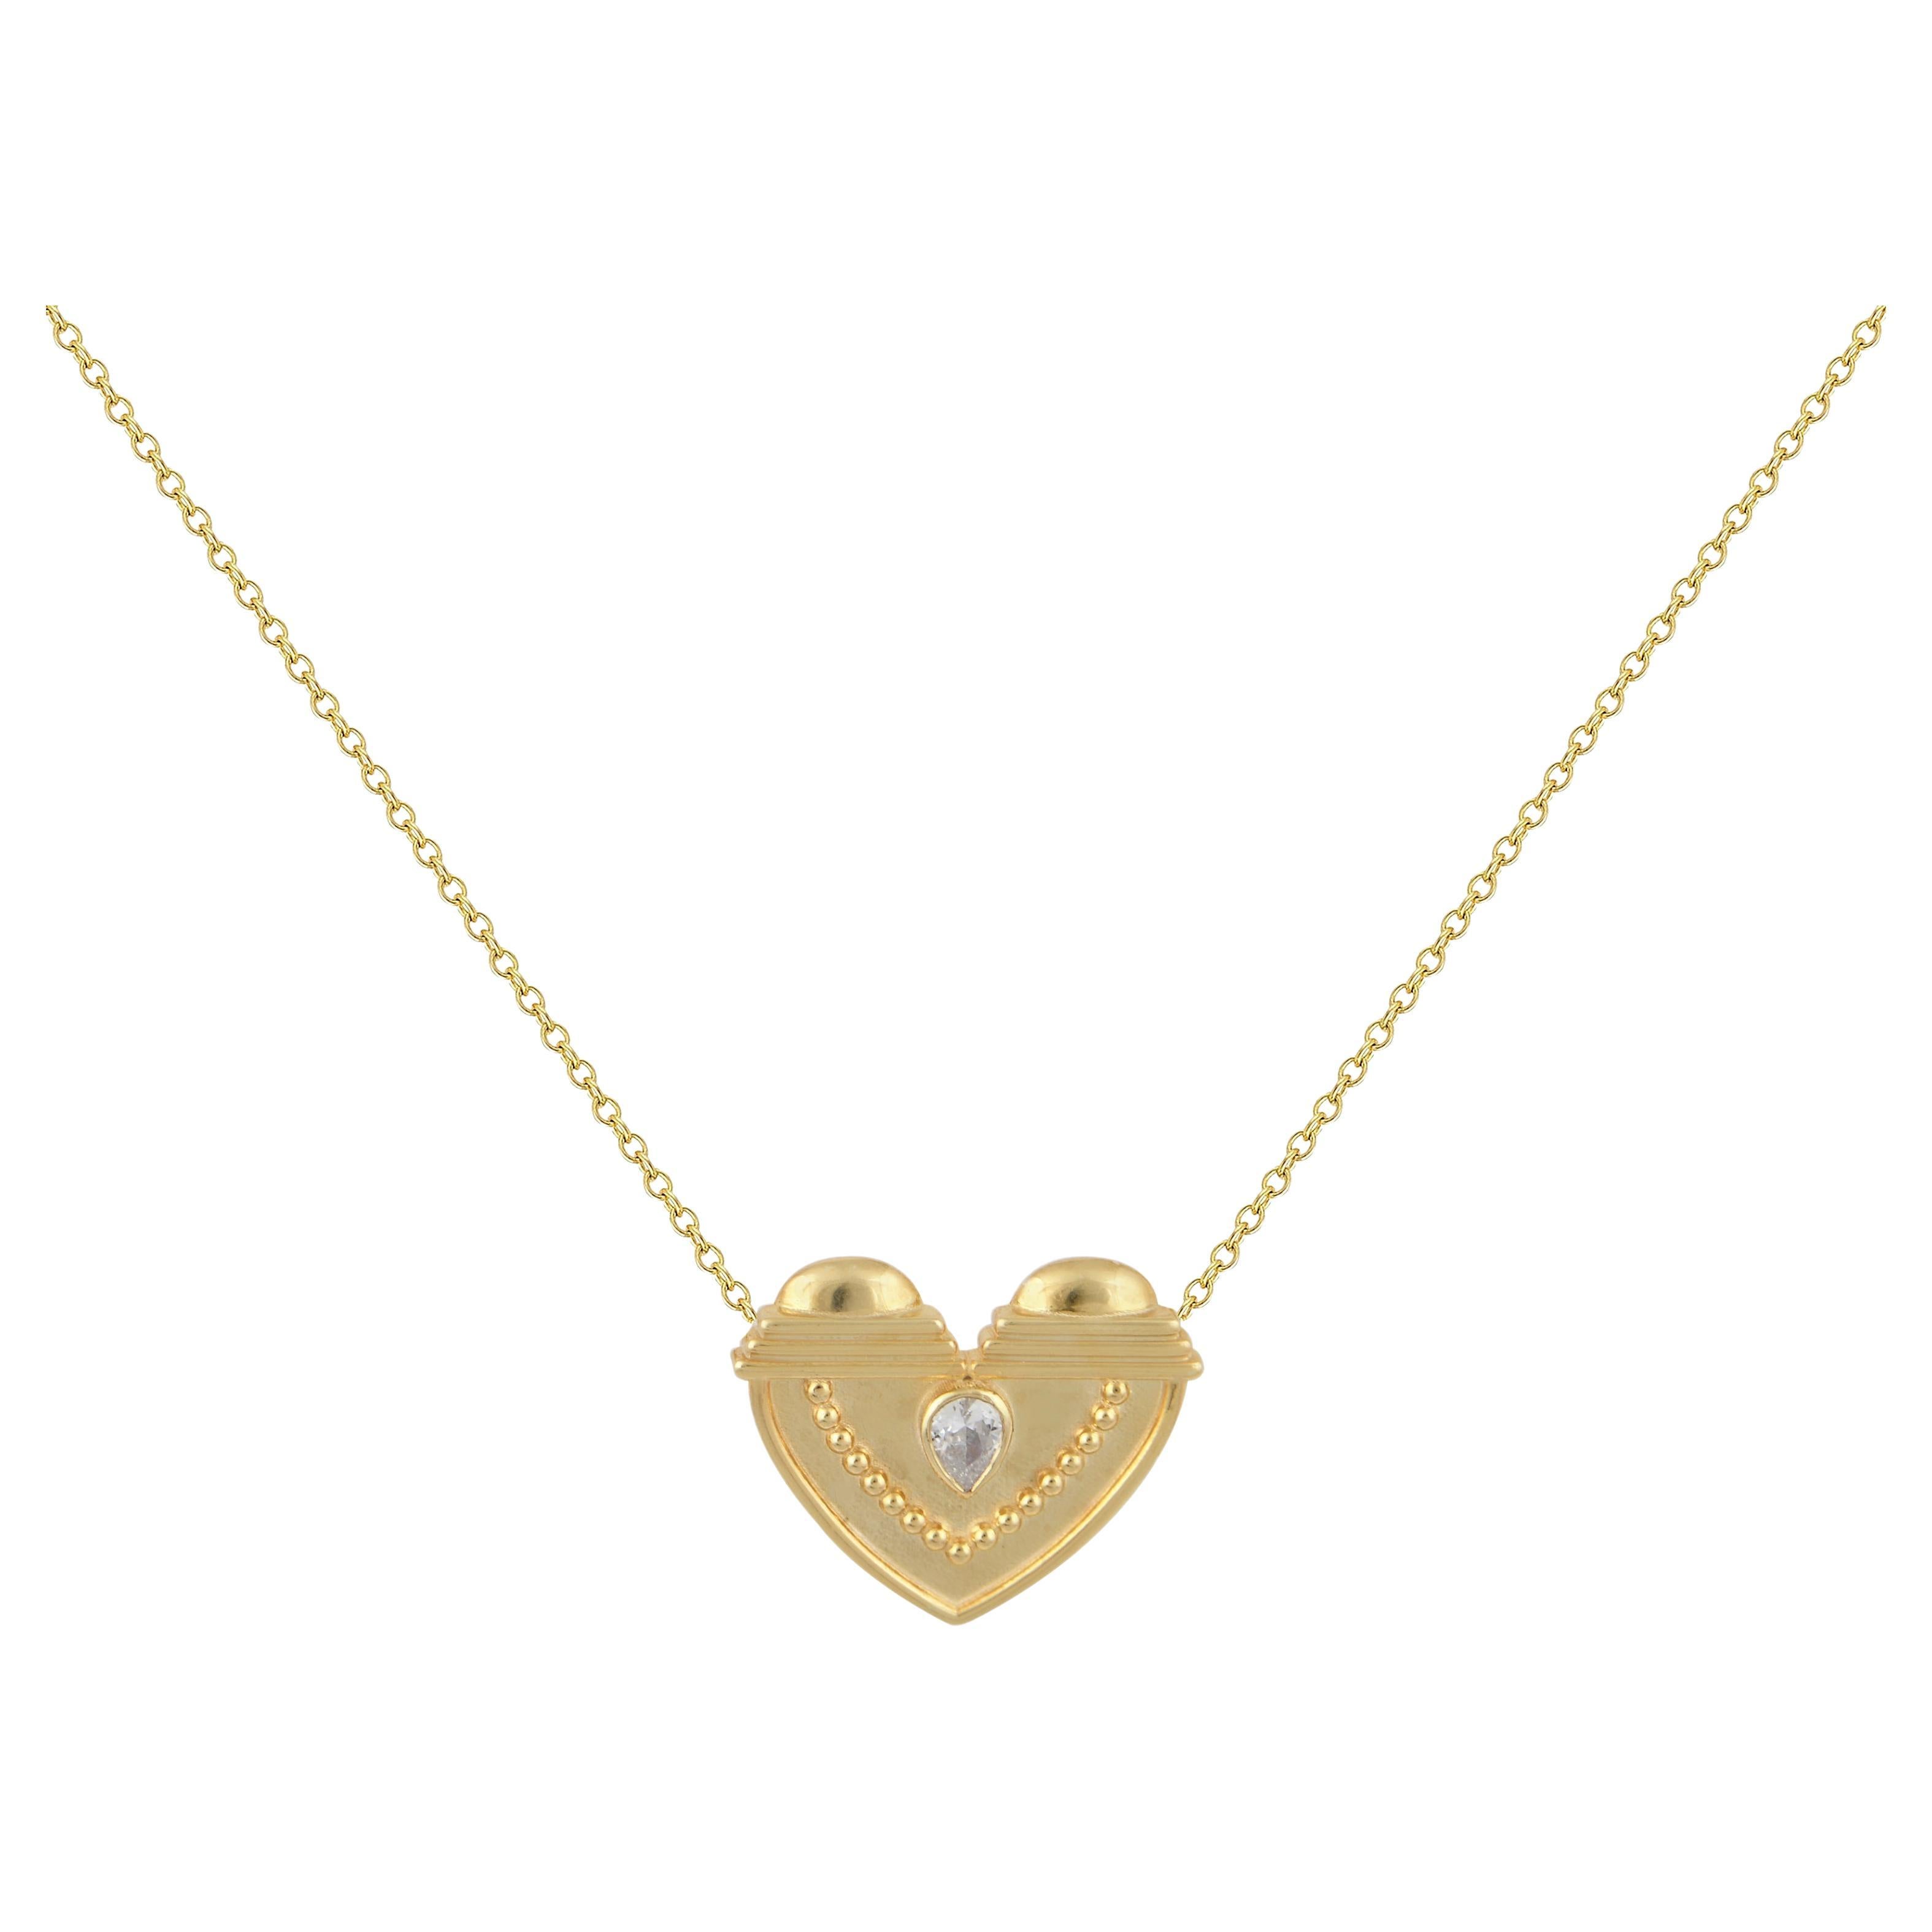 Textured Heart Pendant in 18 Karat Gold With A Pear-Shaped Diamond